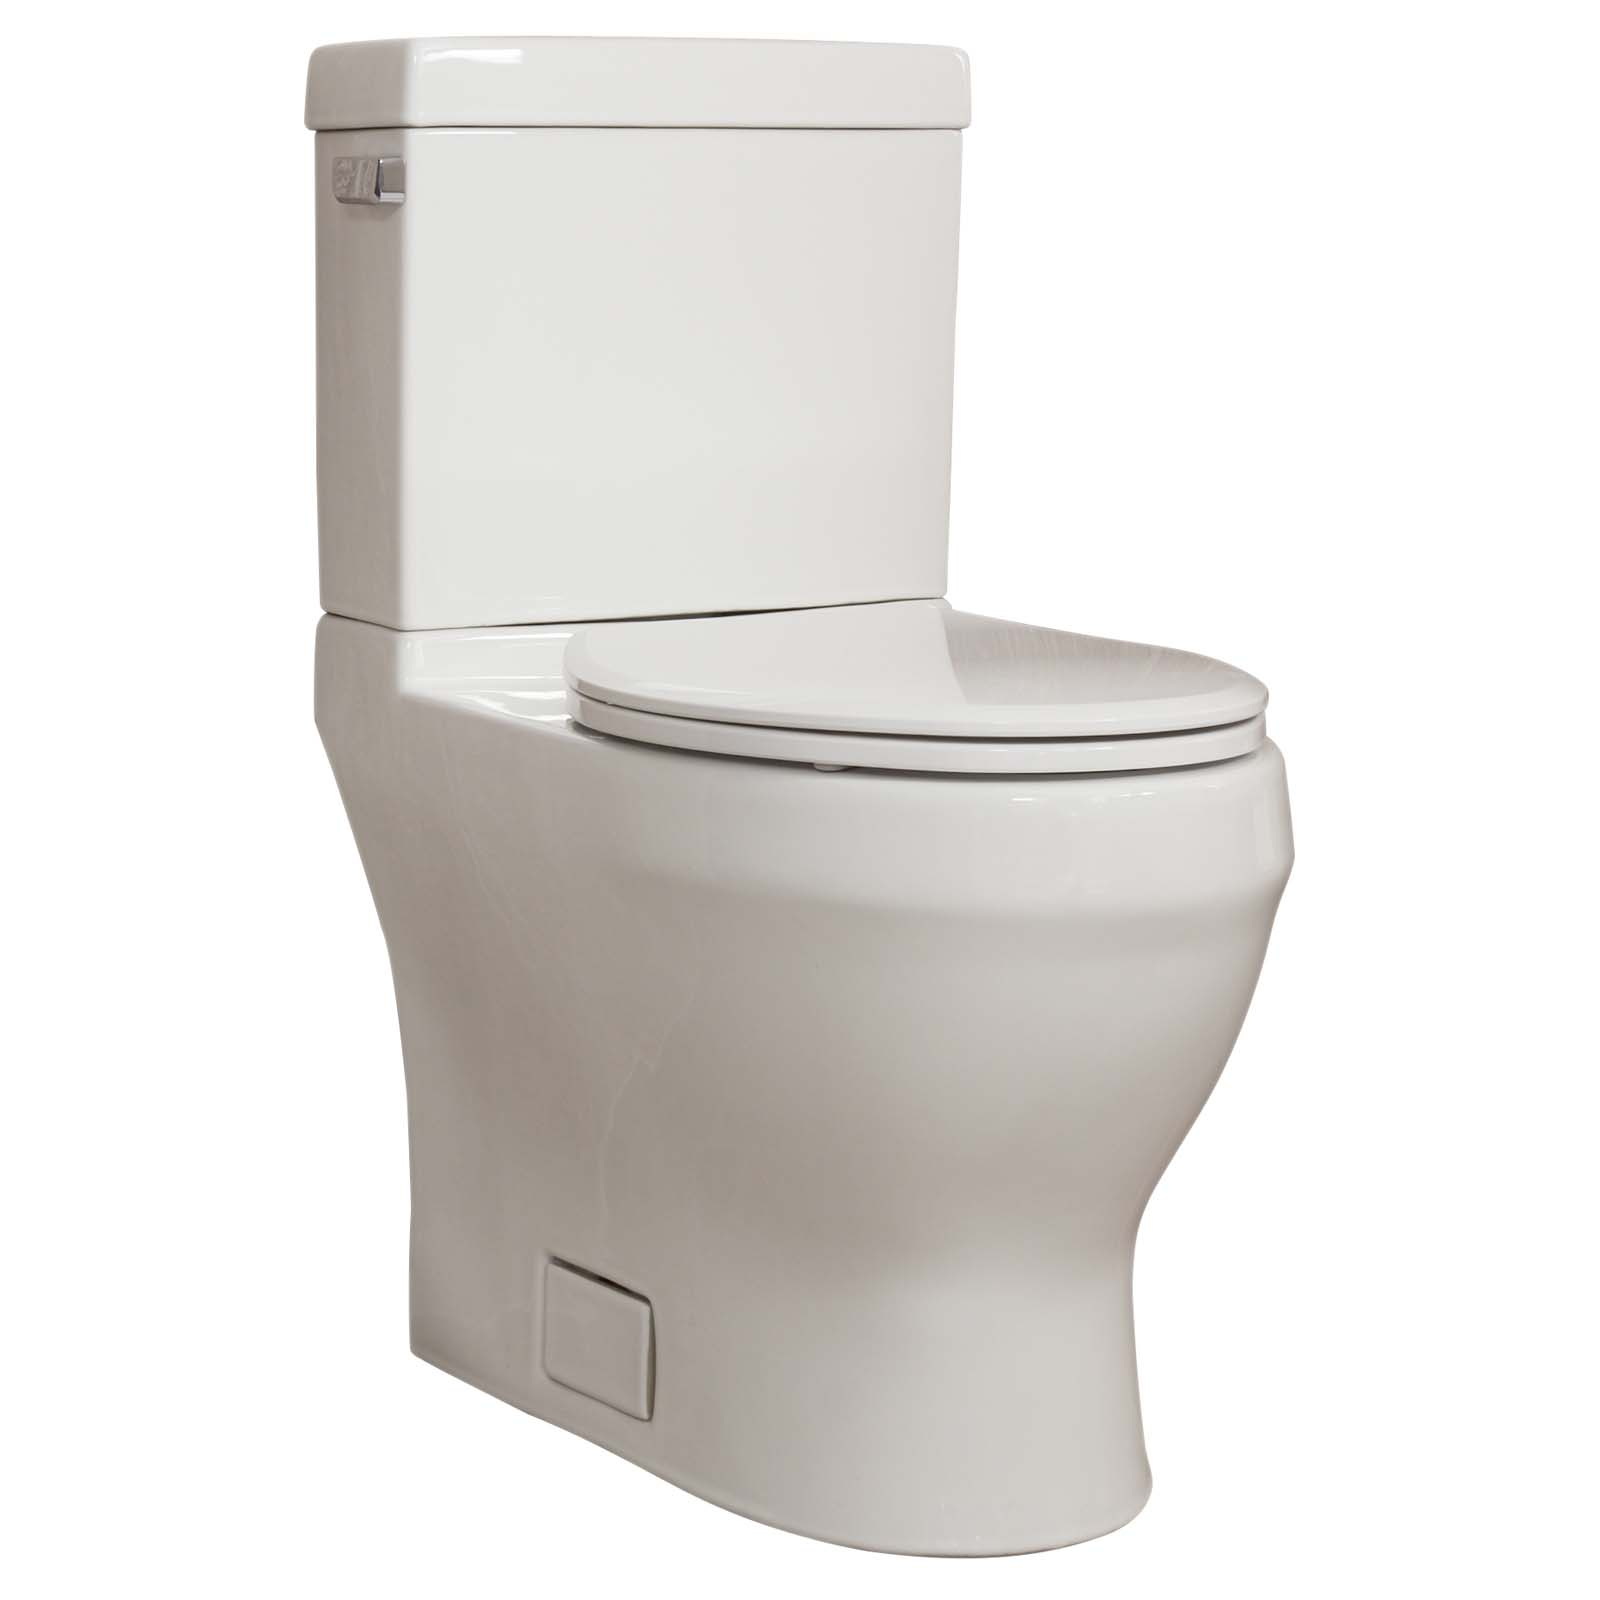 Speakman® T-5000 High Efficiency Skirted Two Piece Toilet, Glenwynn™, Elongated Bowl, 16-1/2 in H Rim, 12 in Rough-In, 1.28 gpf, White, Import